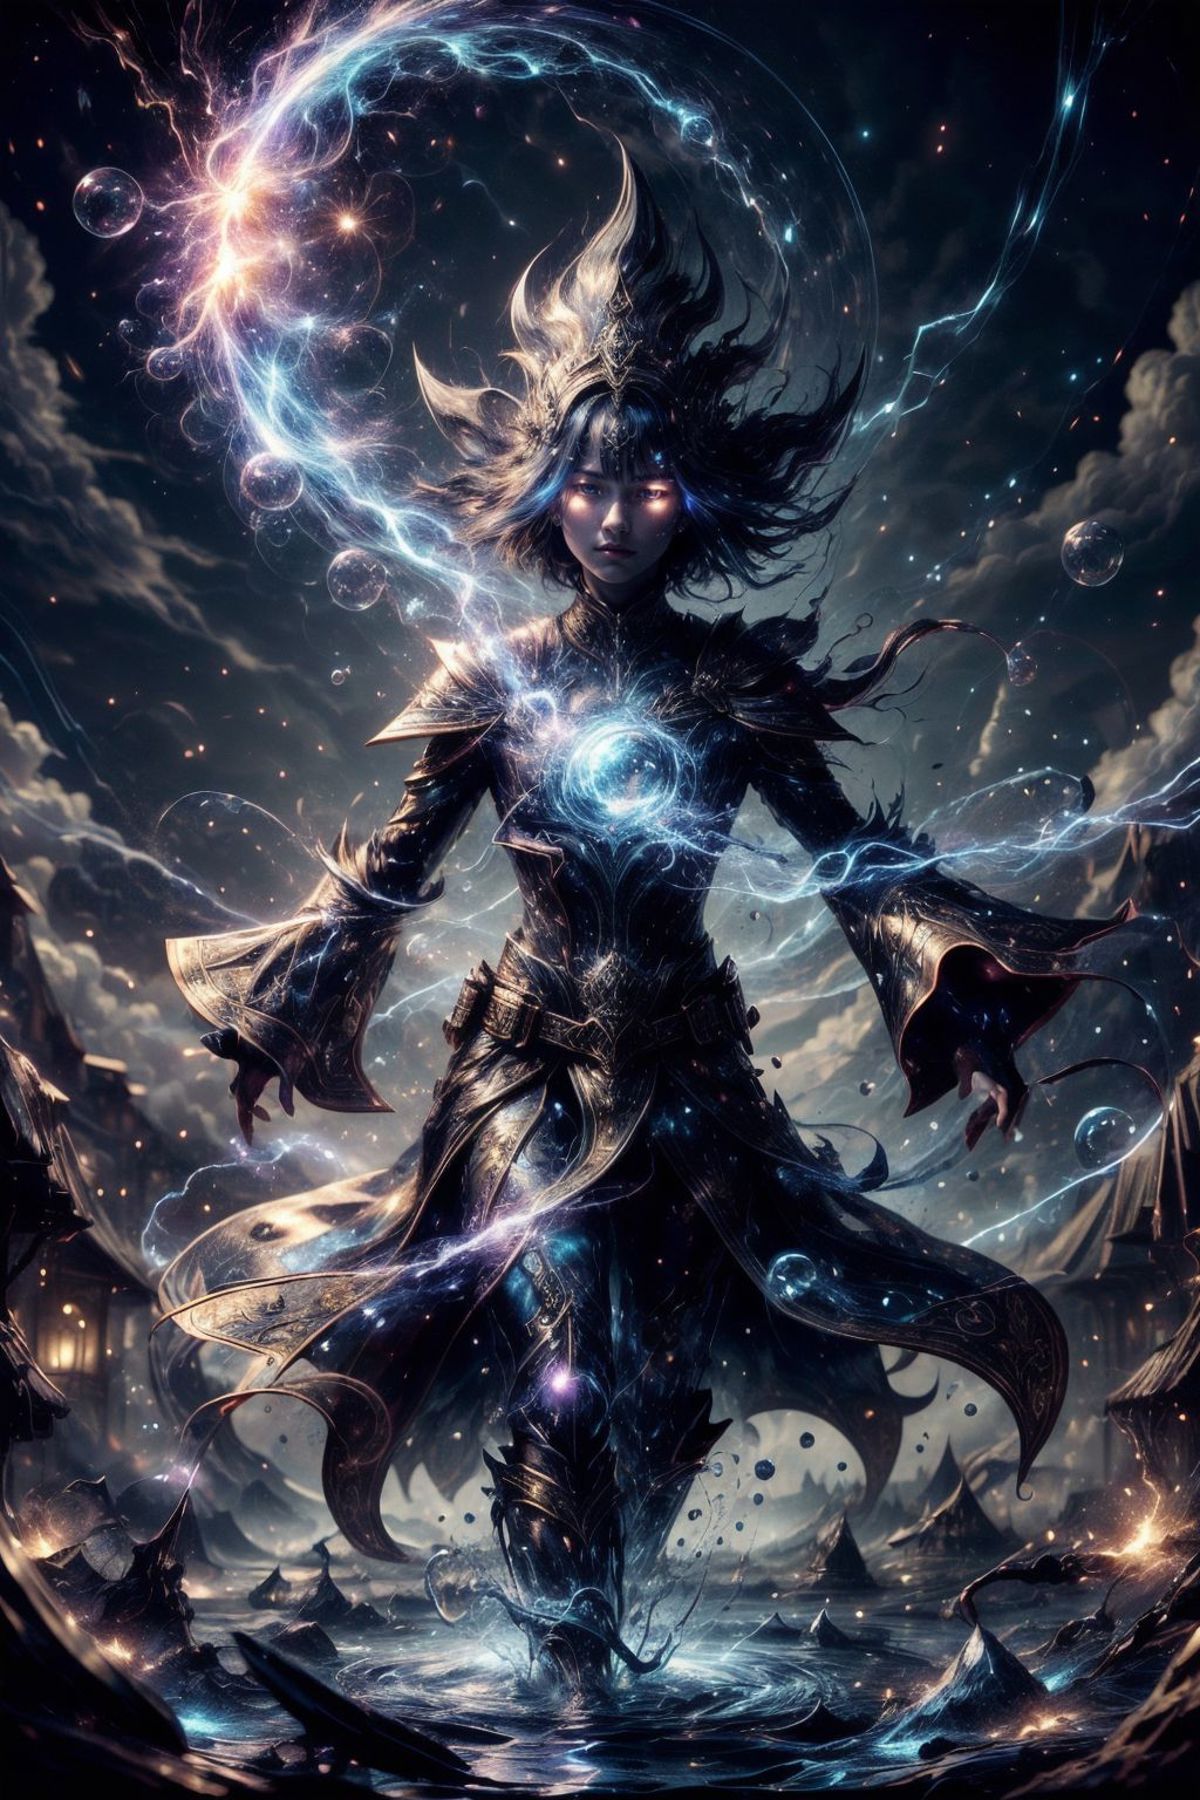 A powerful female warrior in a dark and stormy sky, surrounded by swirling energy and lightning.